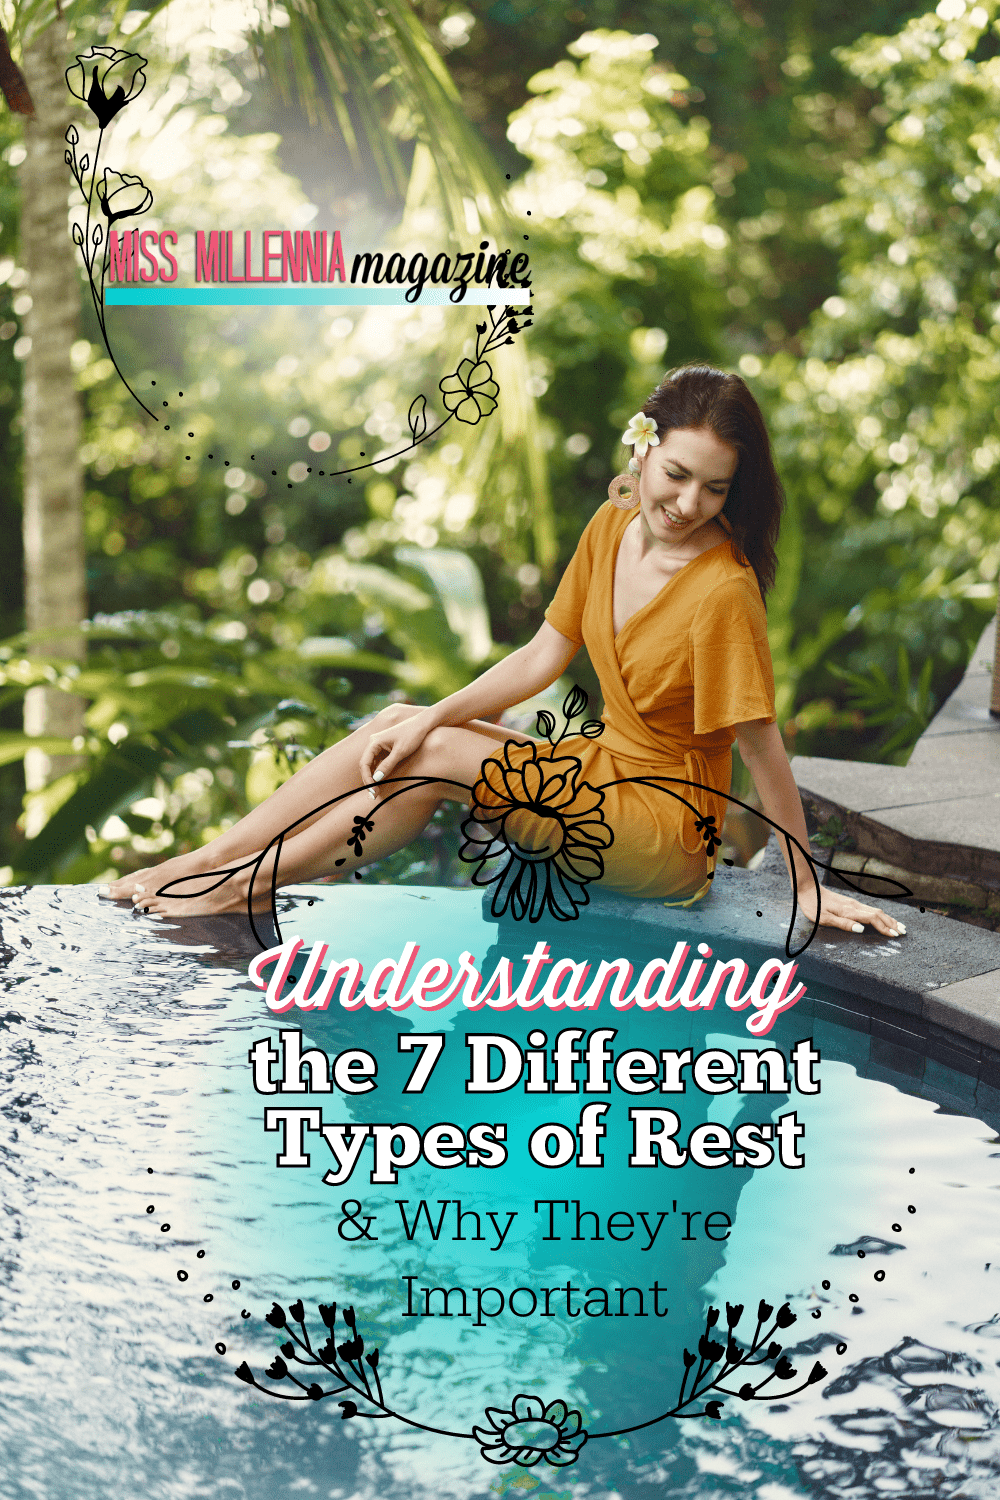 Understanding the 7 Different Types of Rest & Why They’re Important